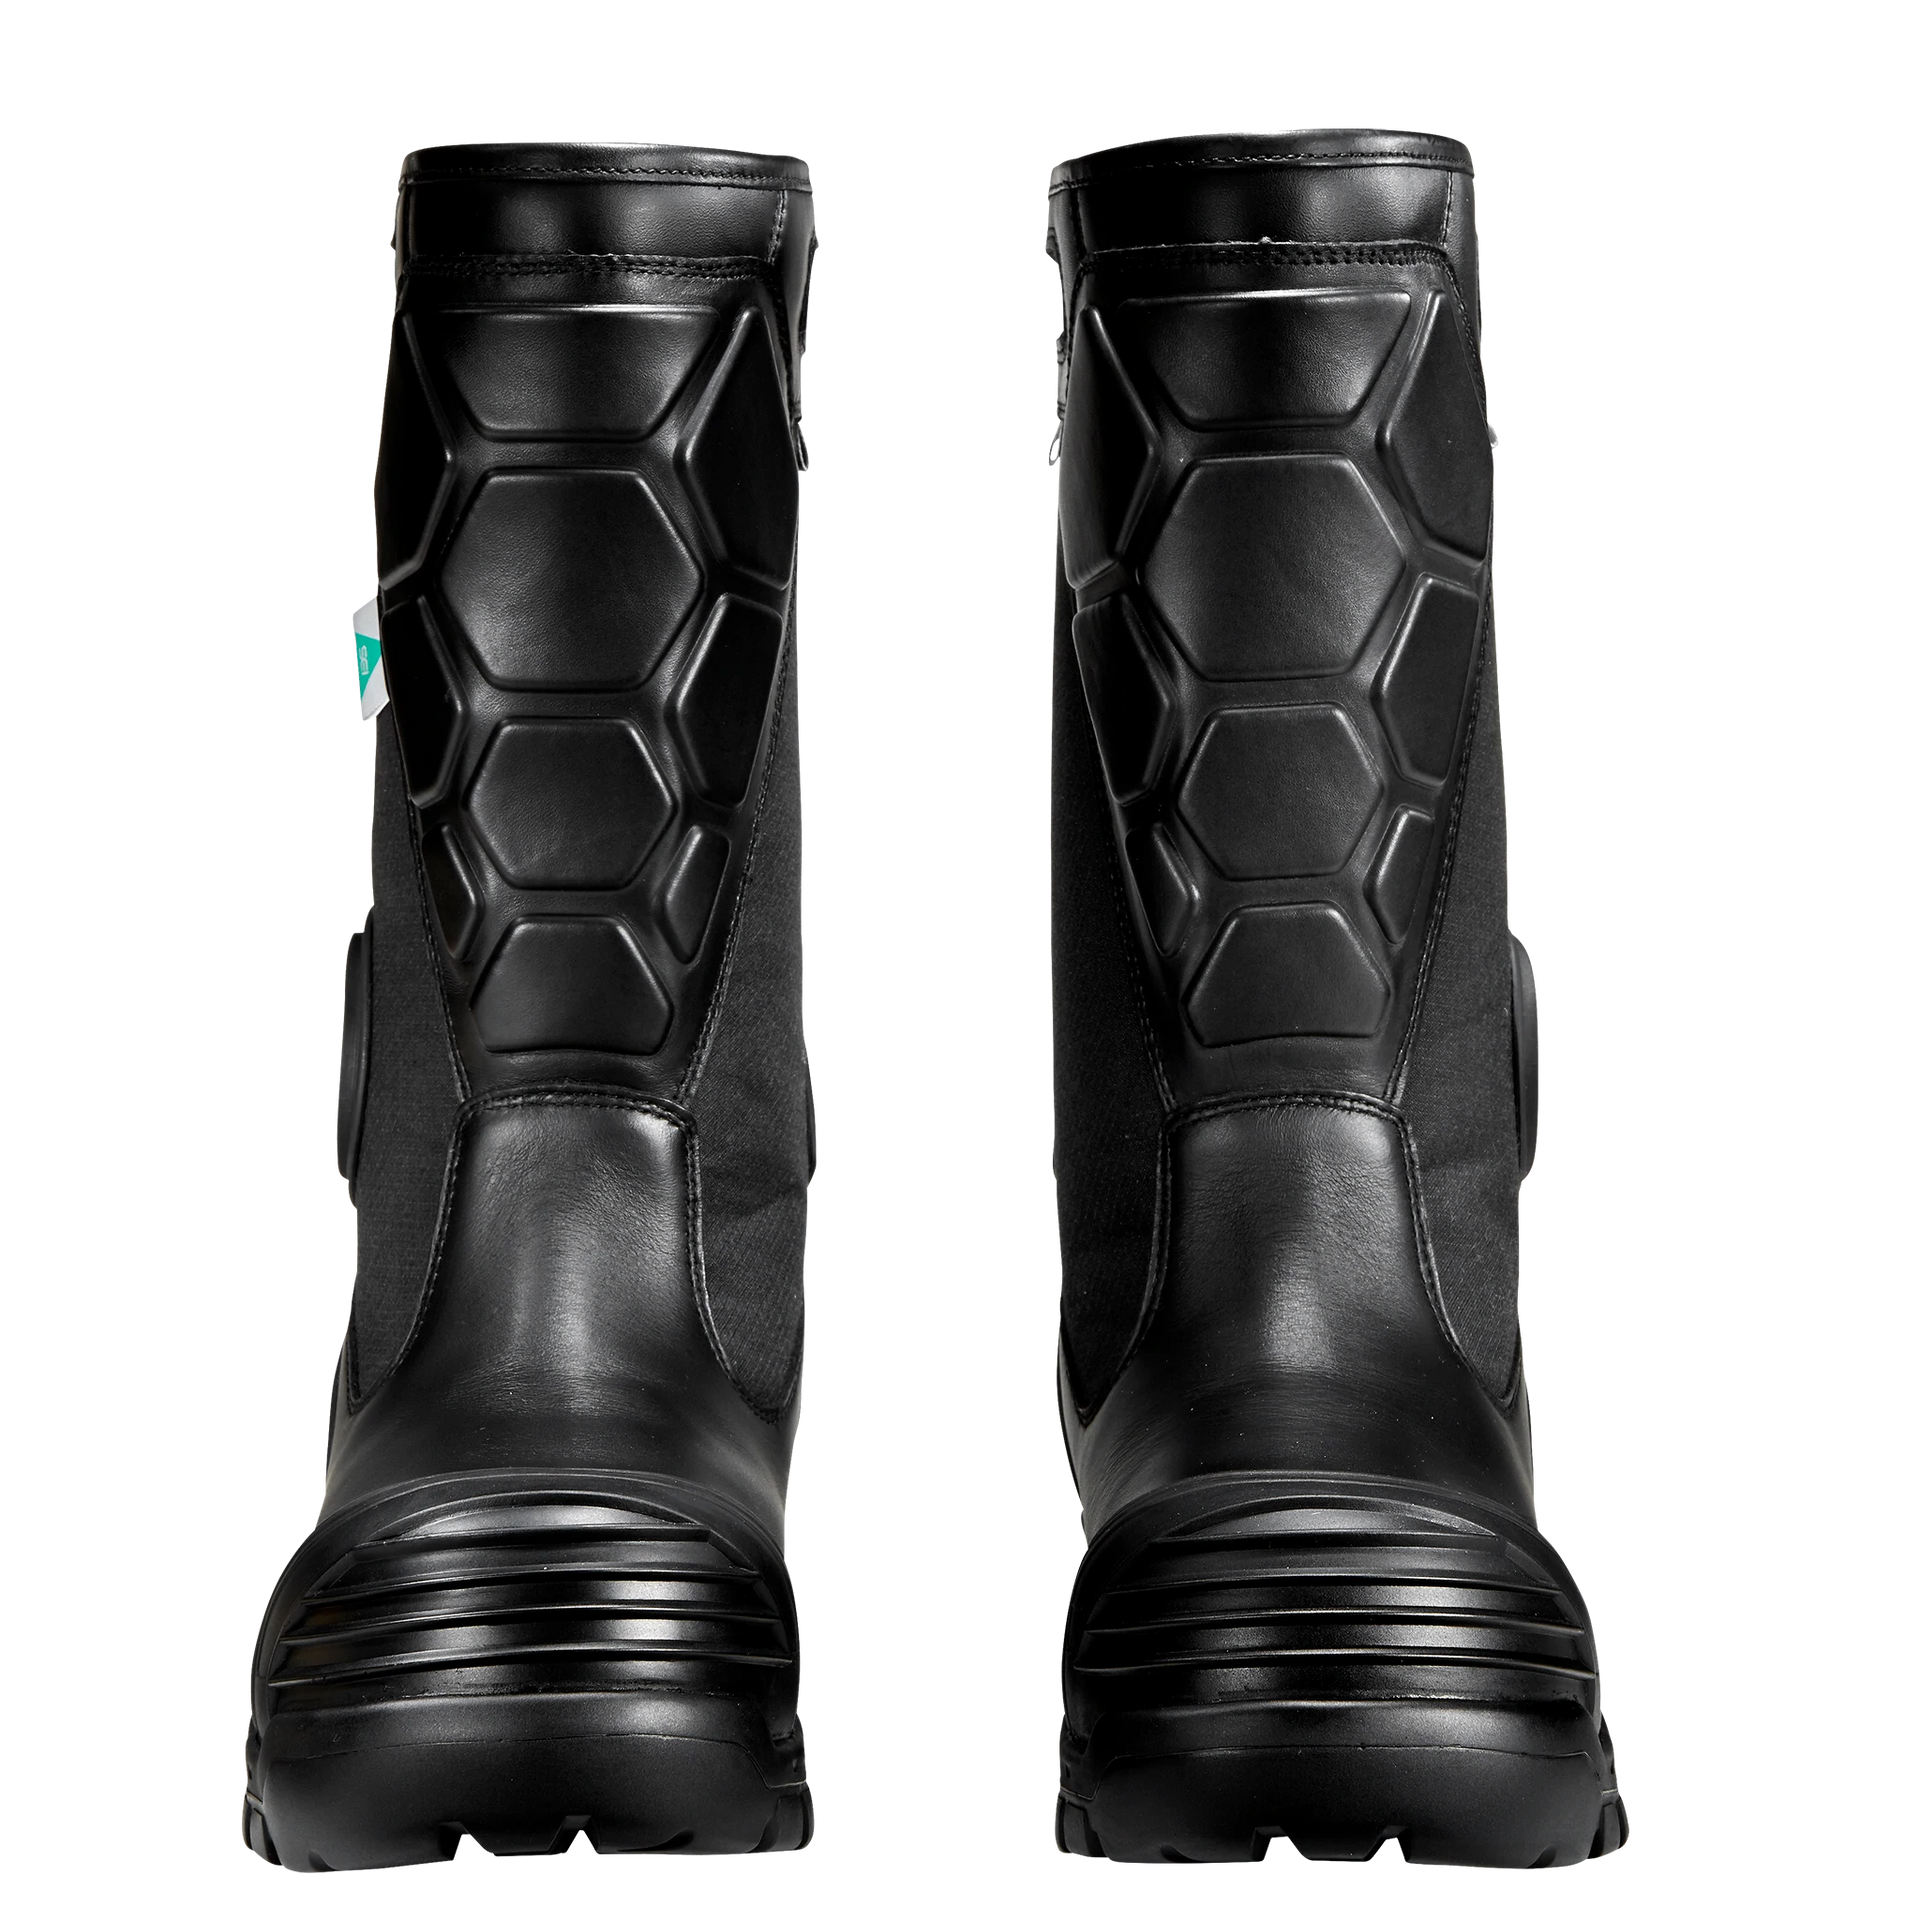 Black Diamond X2 Leather Fire Boot, 14" | The Fire Center | The Fire Store | Store | Fuego Fire Center | Firefighter Gear | Every pair of X2 boots can be custom fit to your feet! Our exclusive innovation reduces heel slippage to increase mobility while keeping your foot in place where and when it’s most important. 3-density, multi-fit, removable footbed with TPU heel cradle for comfort, anti-odor, anti-fungal, breathable and shock absorption for overtime comfort.